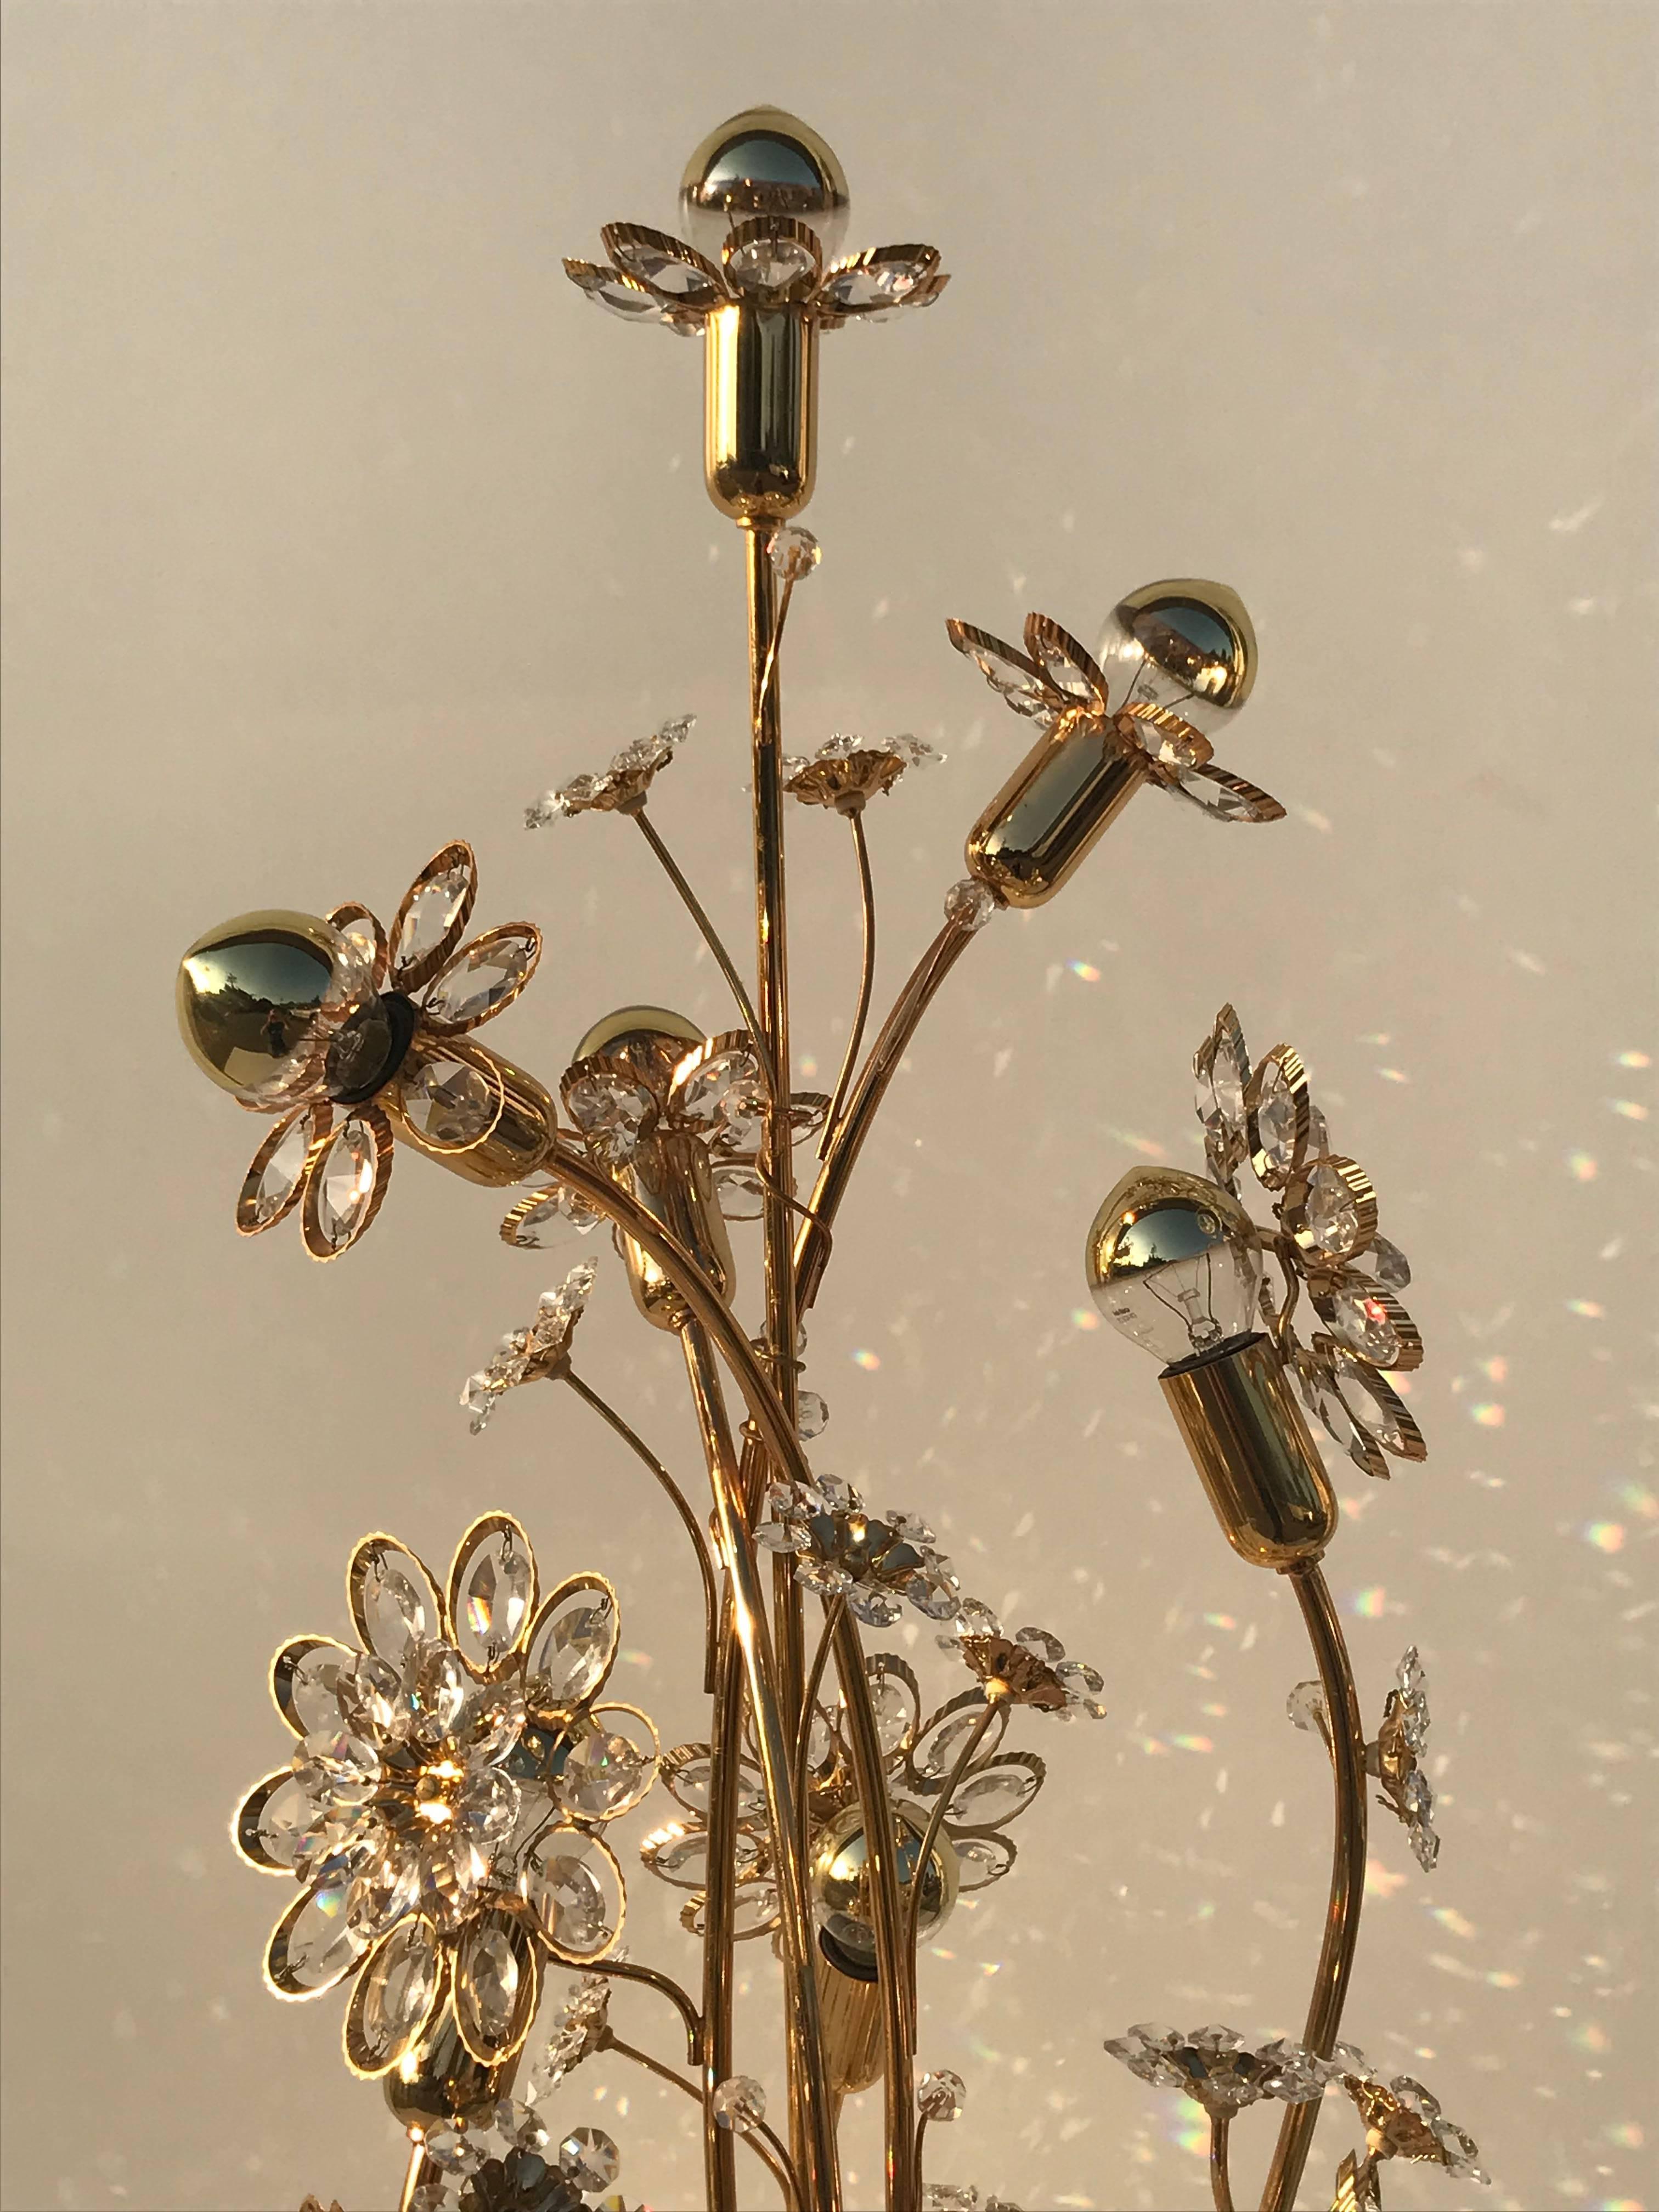 German Enchanting Illuminated Crystal Flower and Brass Floor Lamp by Palwa